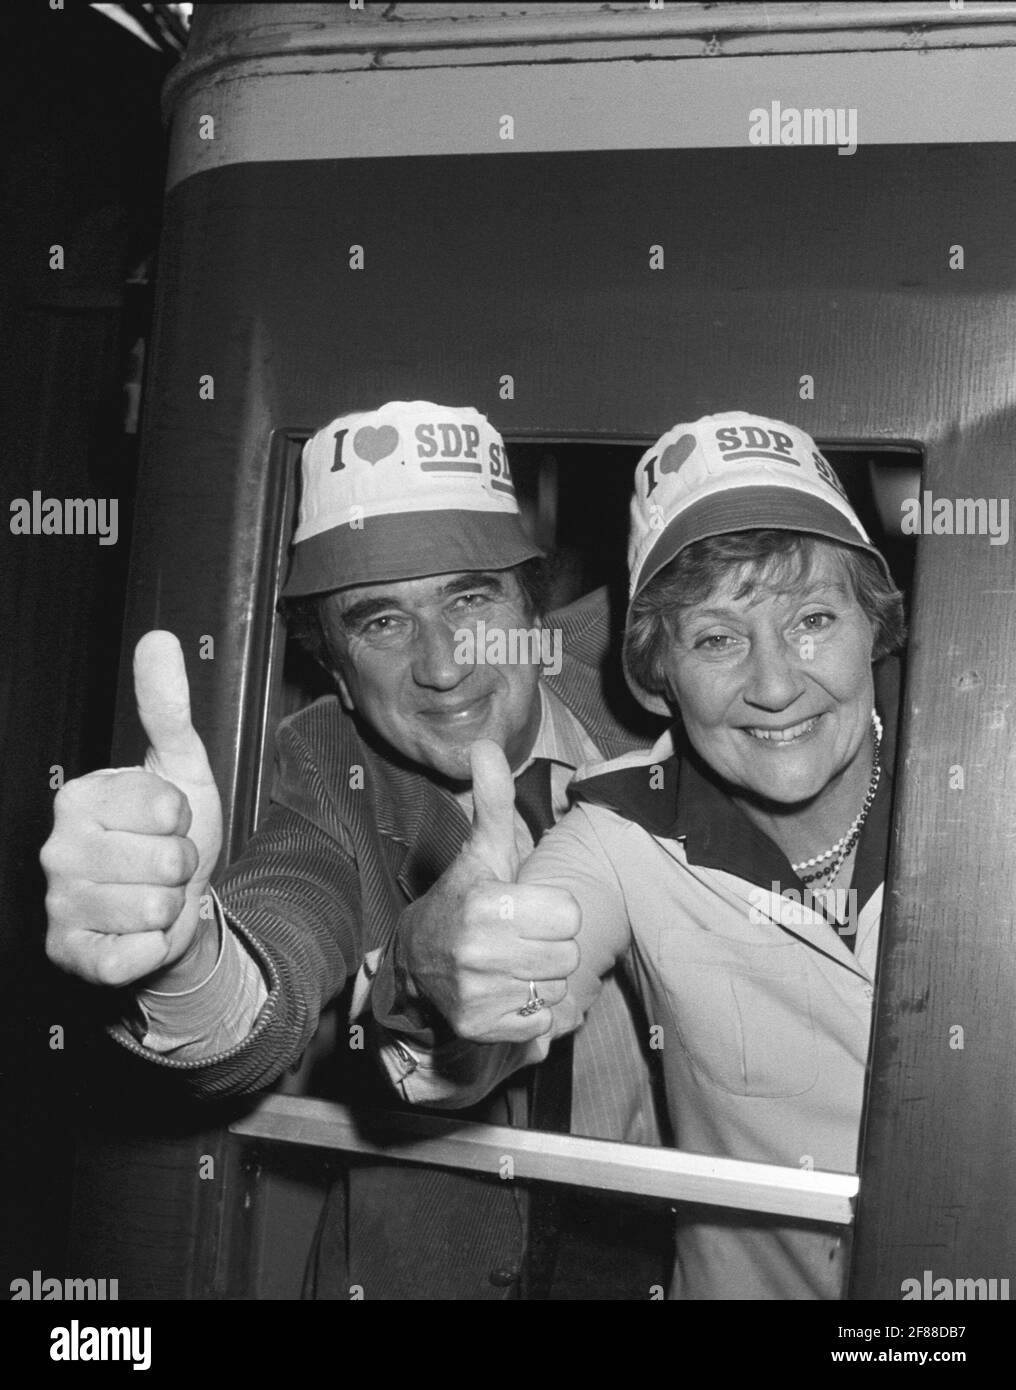 File photo dated 06/09/85 of Social Democratic Party leaders Shirley Williams and Bill Rodgers wearing 'I love the SDP' hats aboard their train at Paddington Station bound for Torquay and their annual party conference. The former cabinet minister and Liberal Democrat peer, Baroness Williams of Crosby, has died aged 90, the Liberal Democrats have said. Issue date: Monday April 12, 2021. Stock Photo